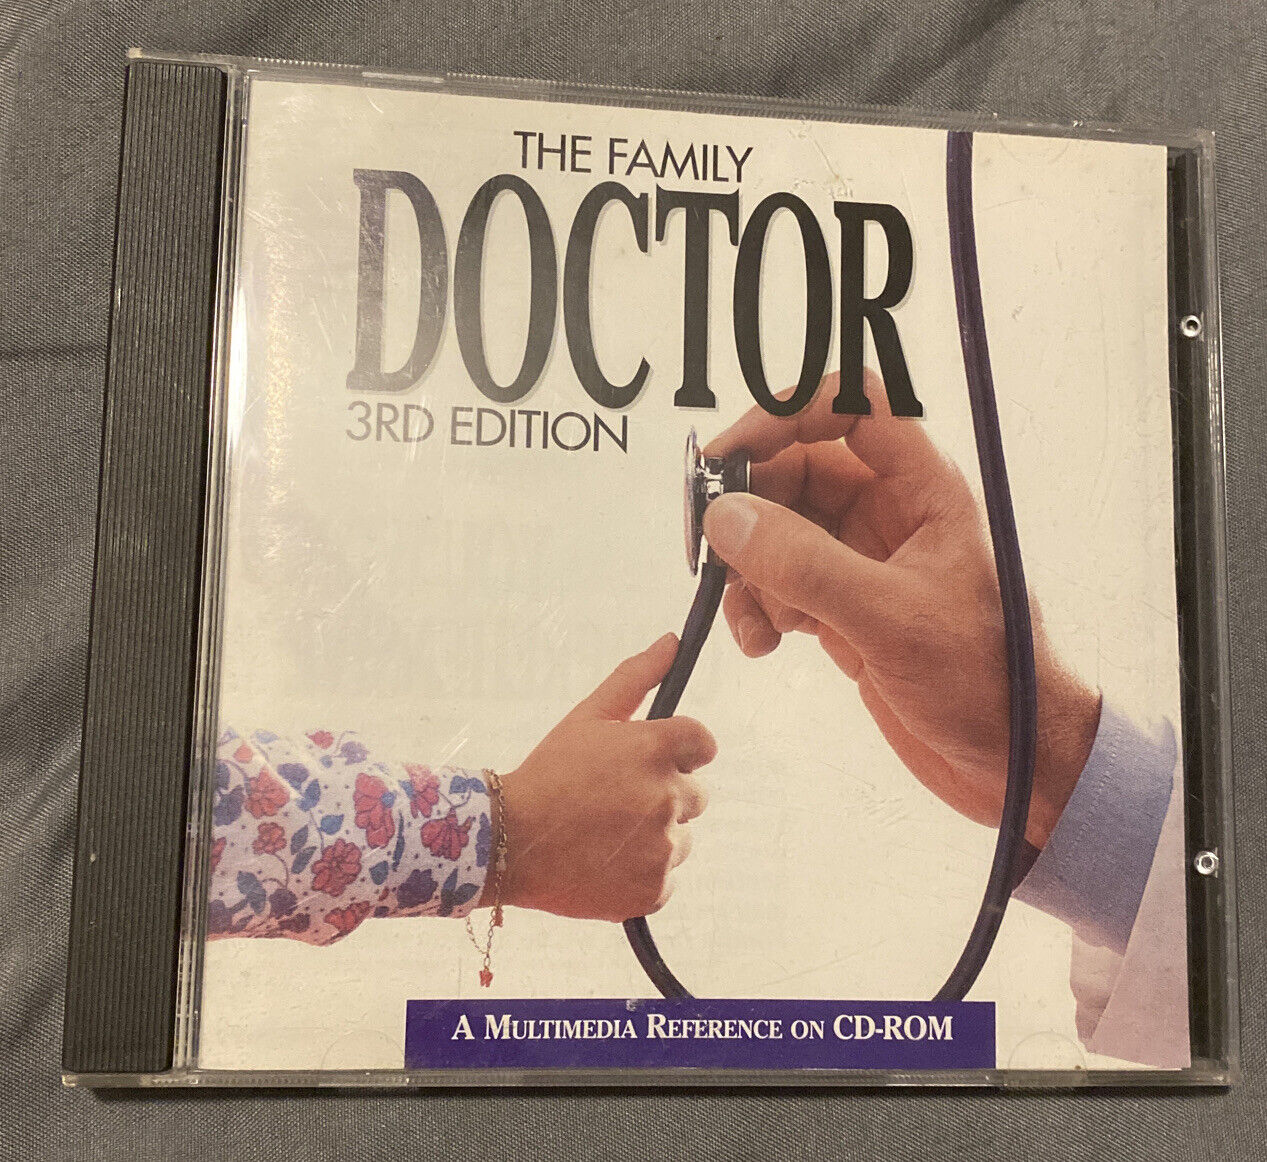 The Family Doctor 3rd Edition for Mac In Very Good Condition